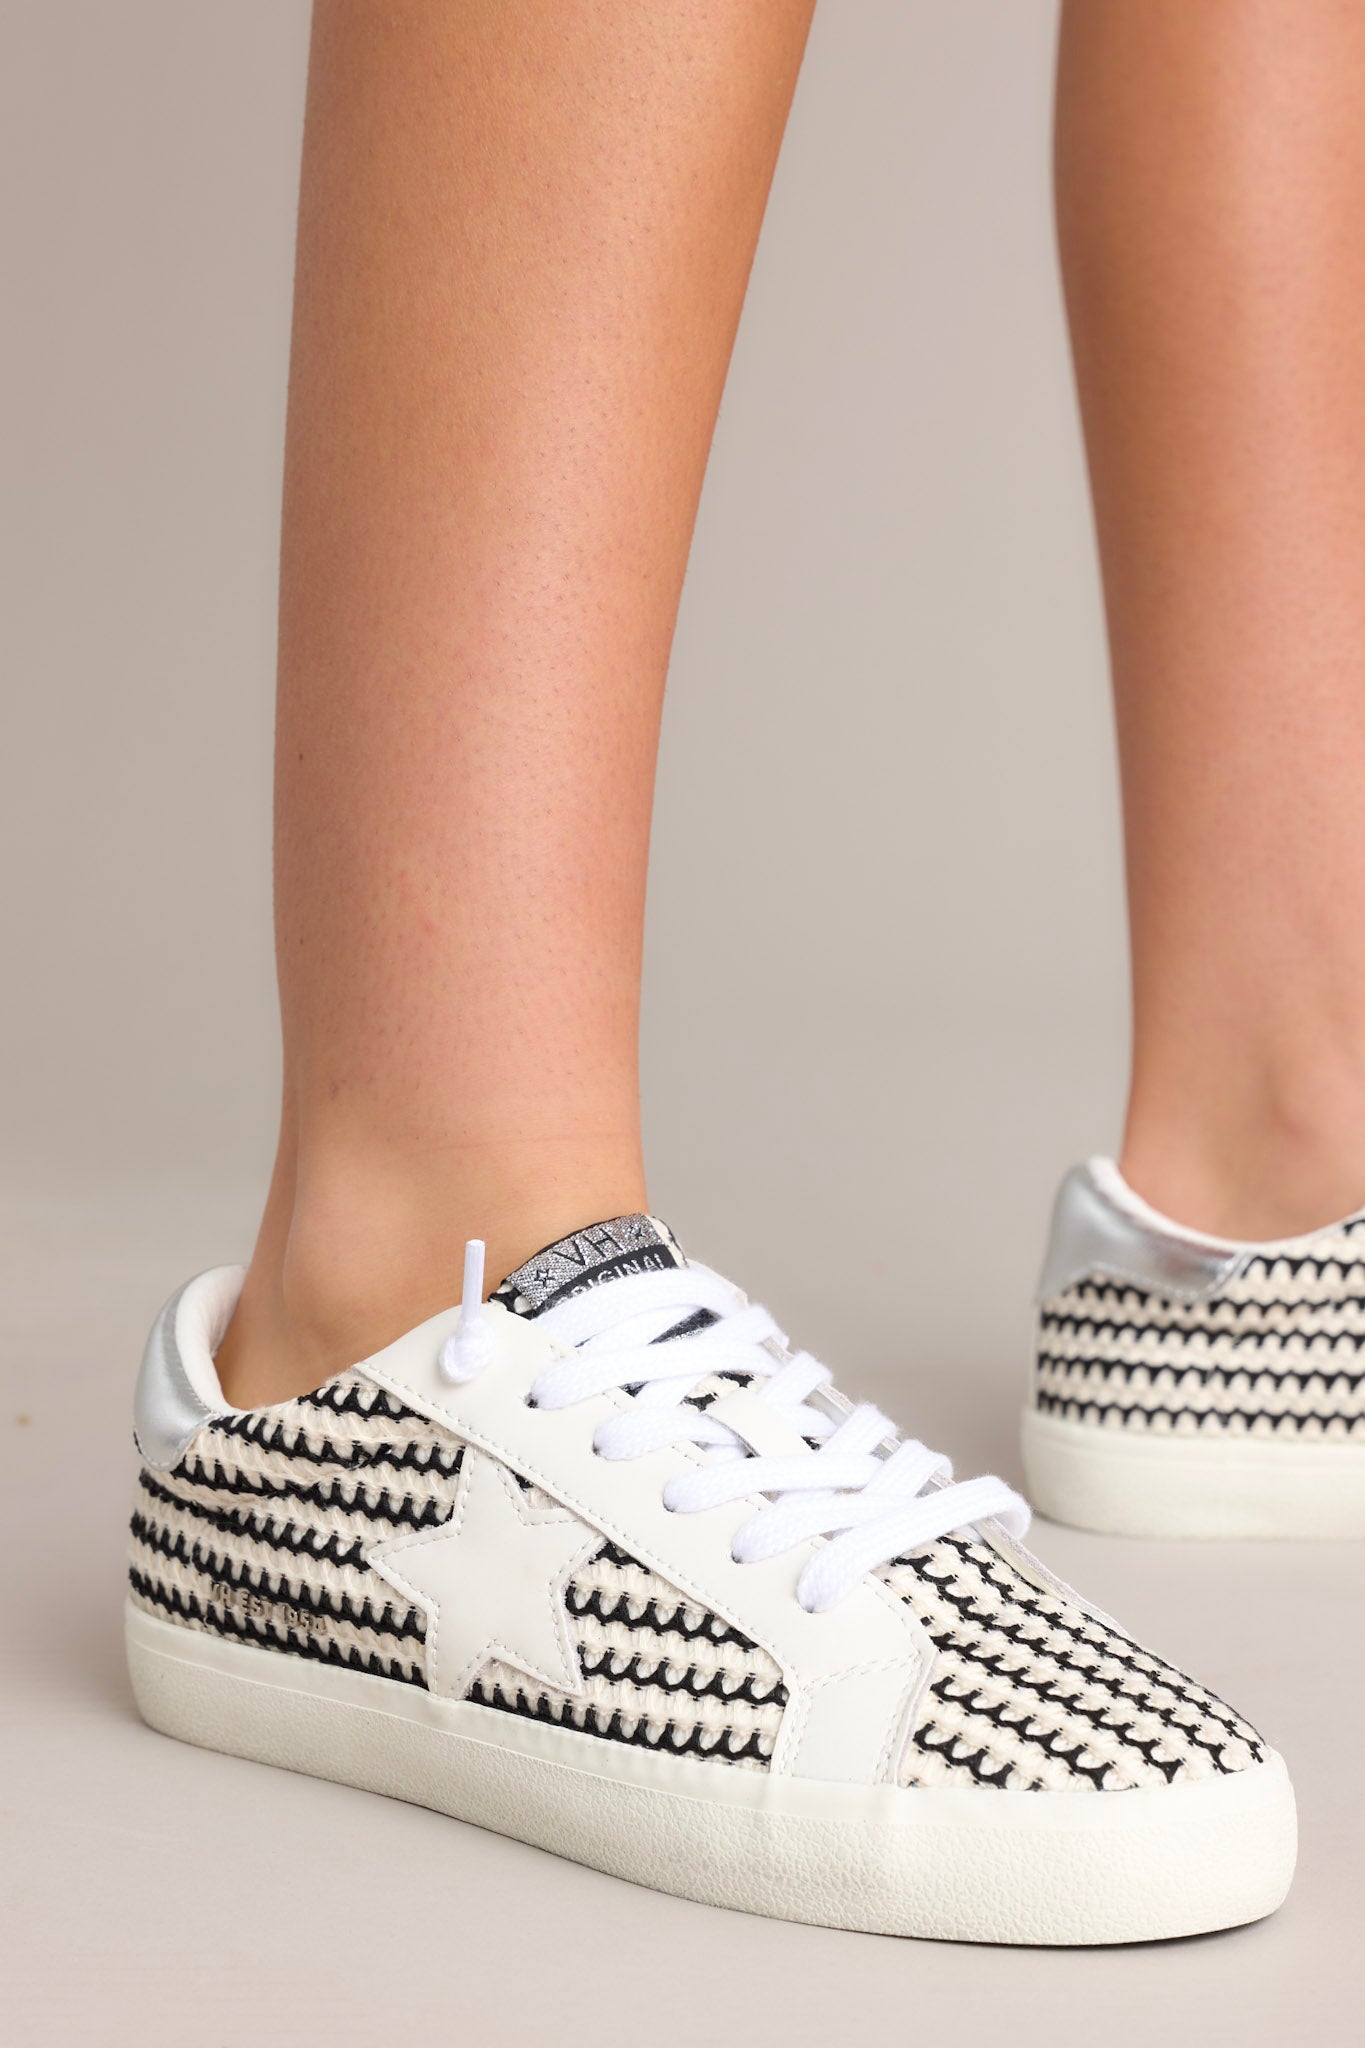 These black and white shoes feature a rounded toe, no-tie laces, replacement laces, star detailing , and a thick sole.